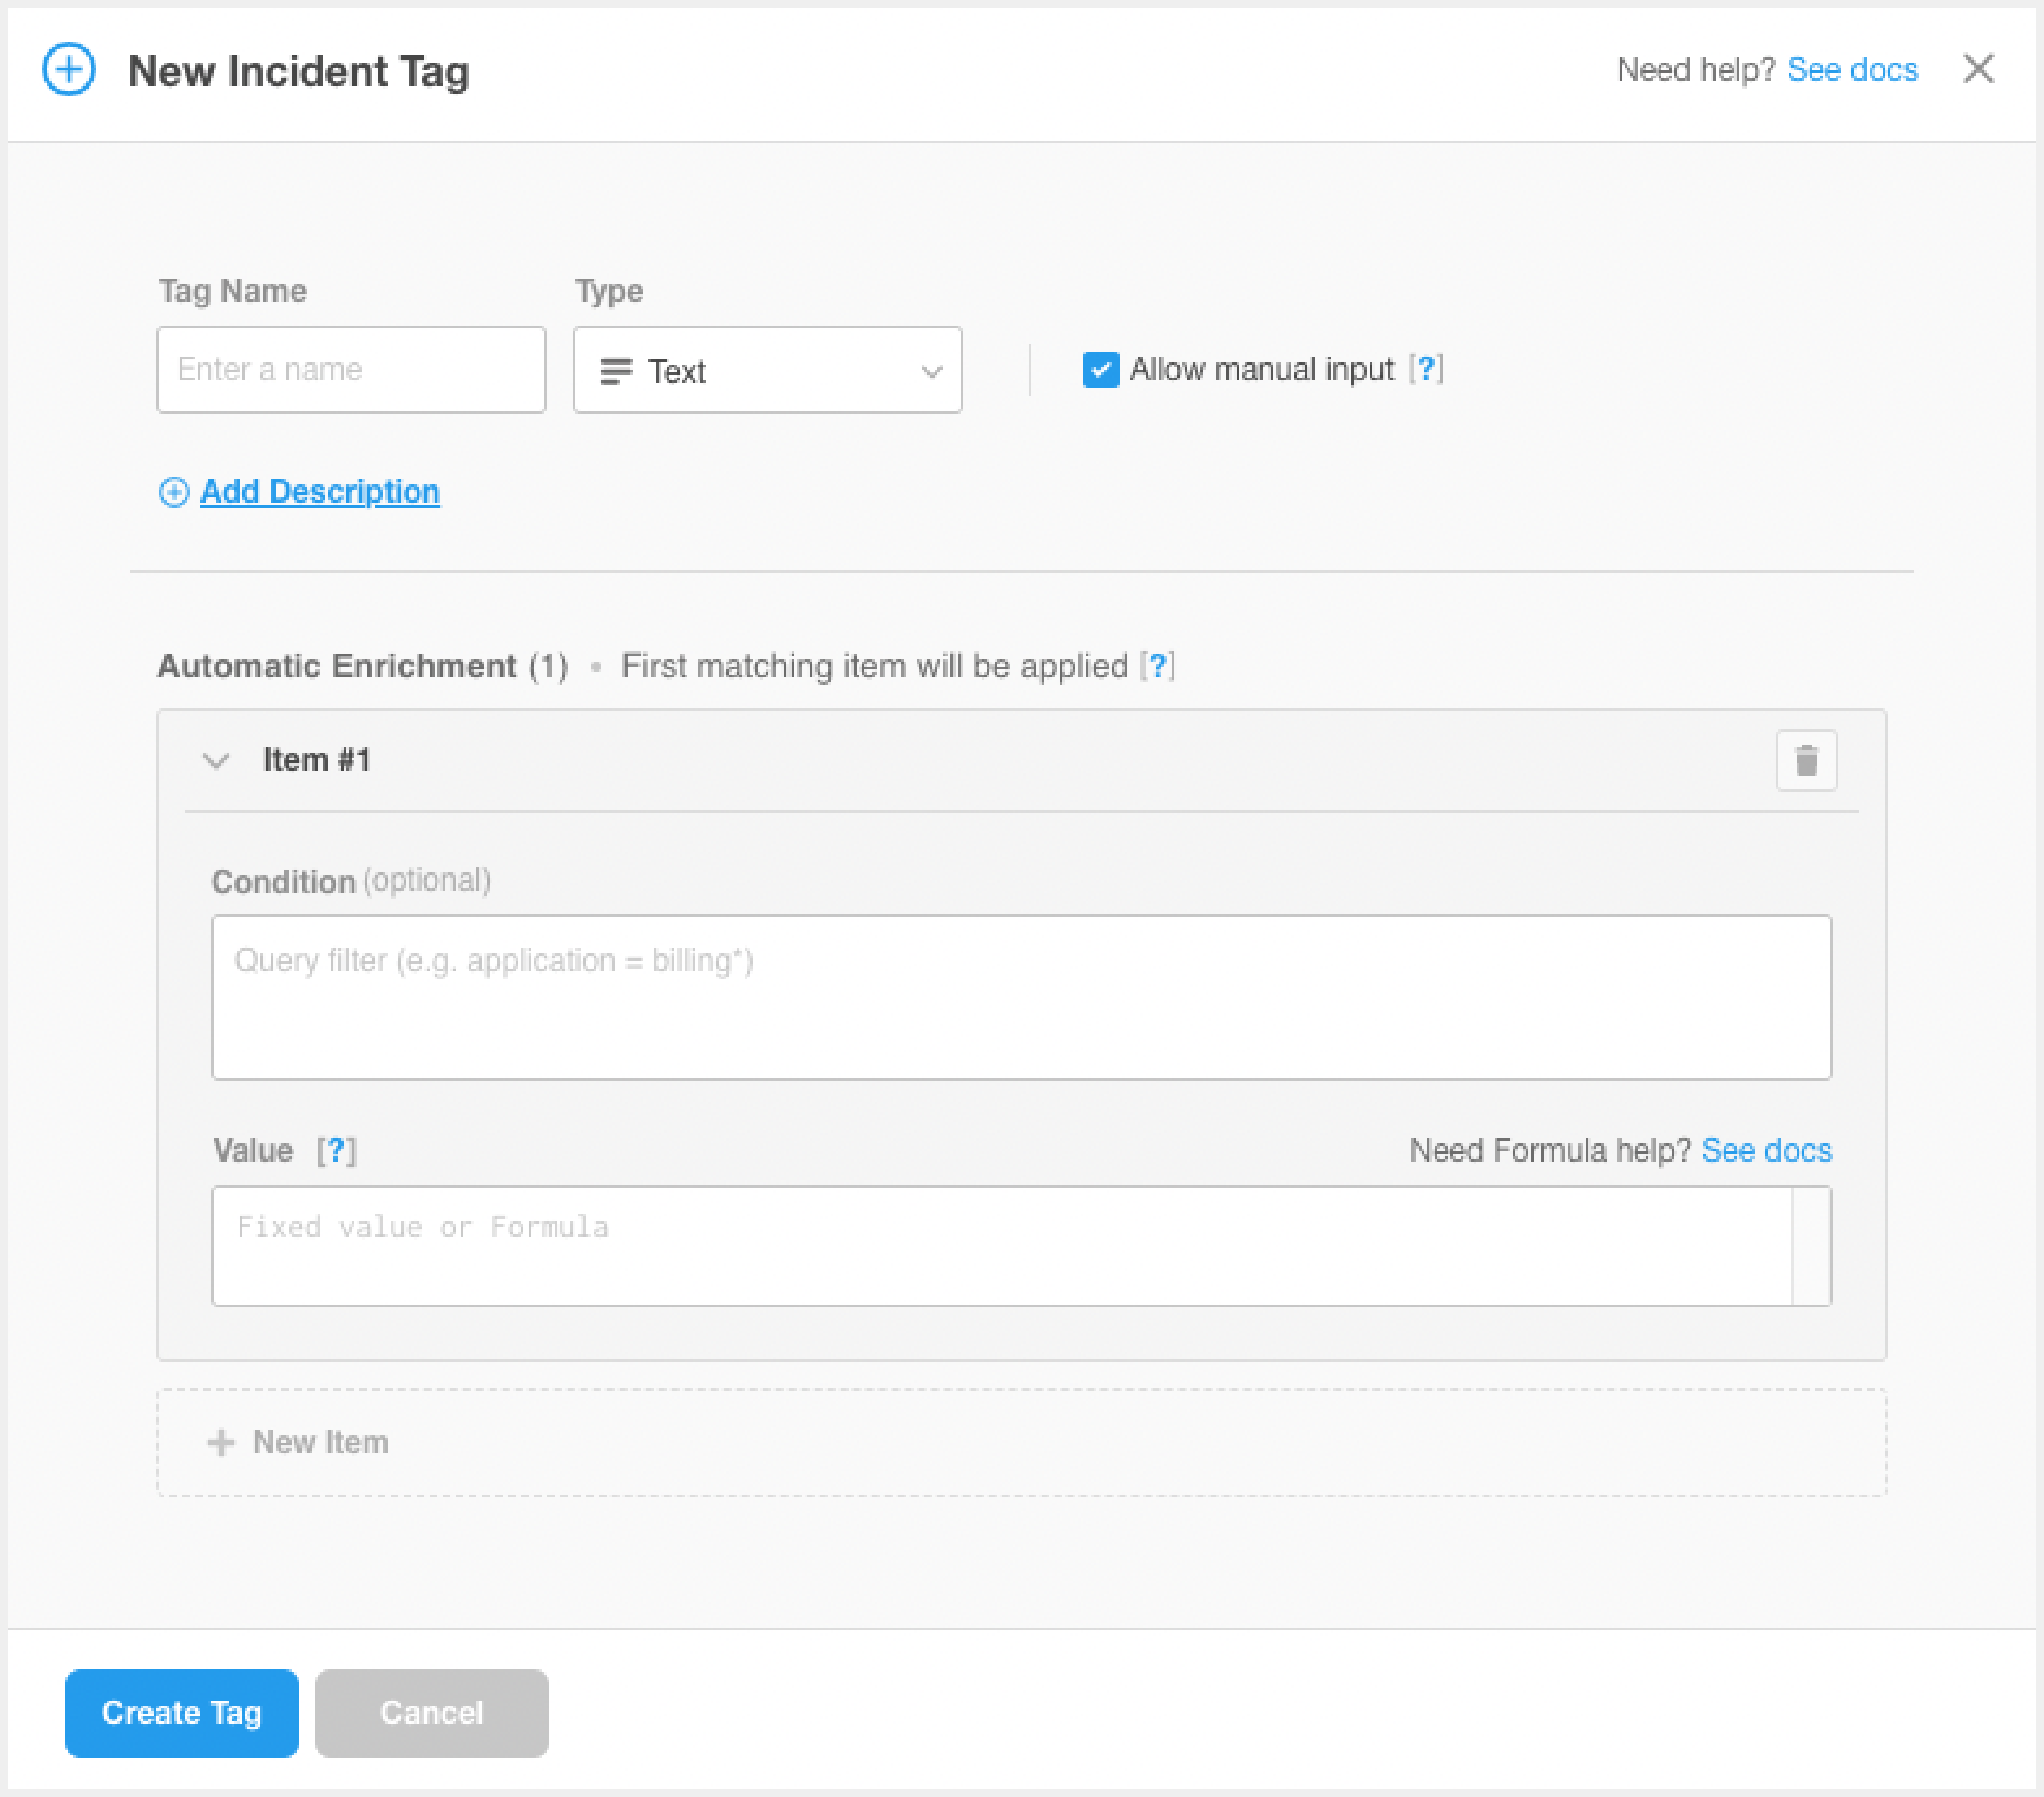 Create a New incident tag